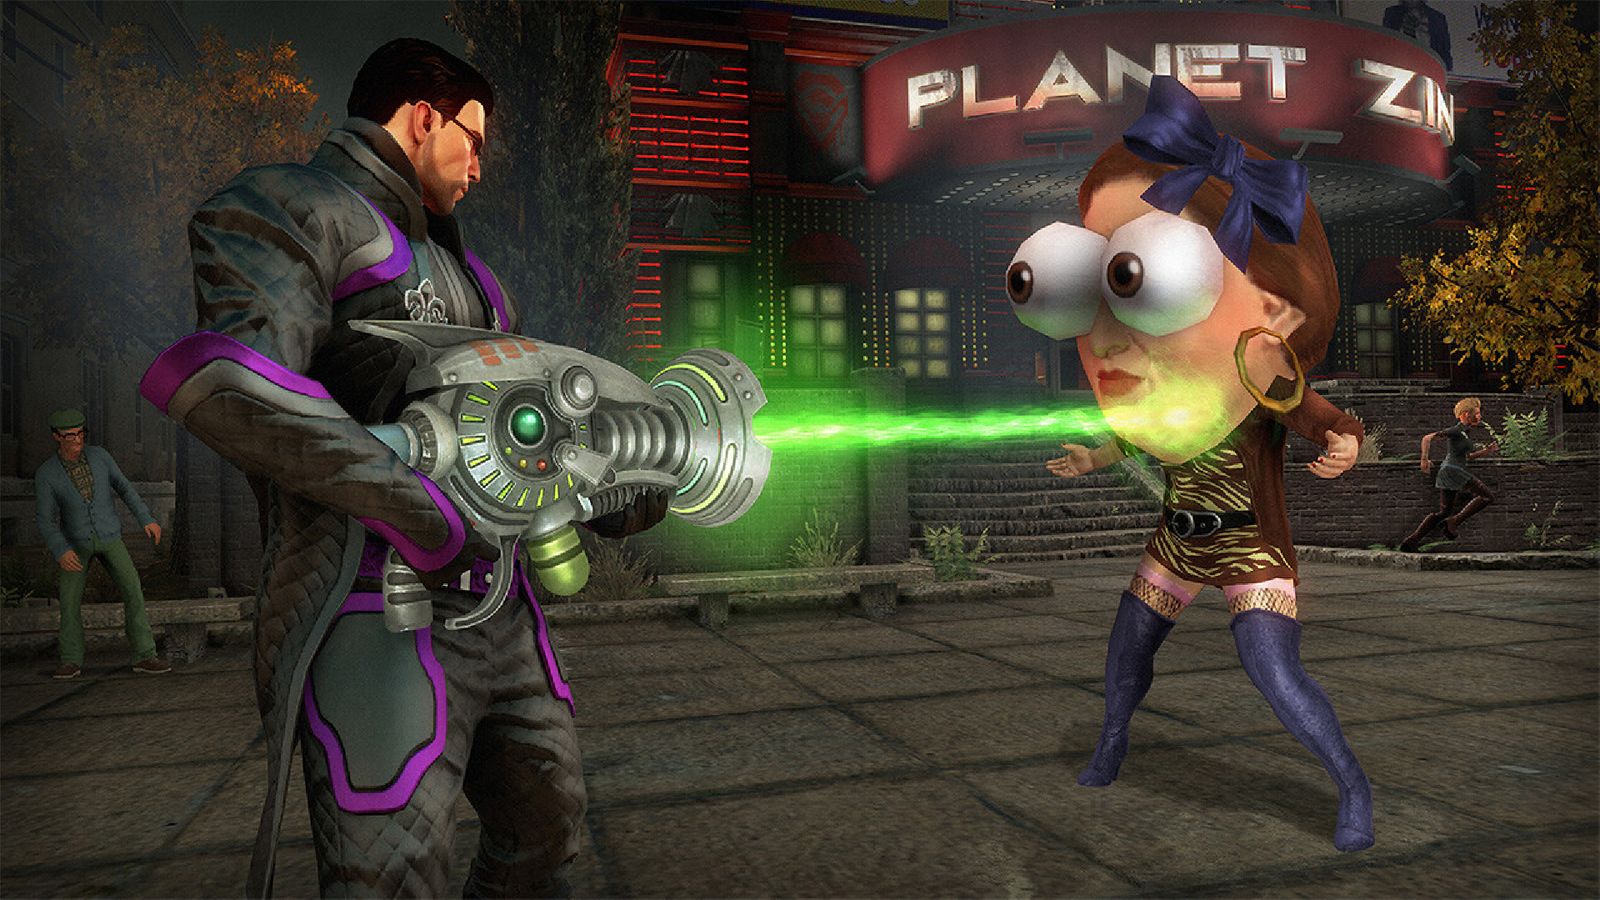 In-game image from Saints Row 4 of a character in black and purple using a weapon to blow up another characters head.